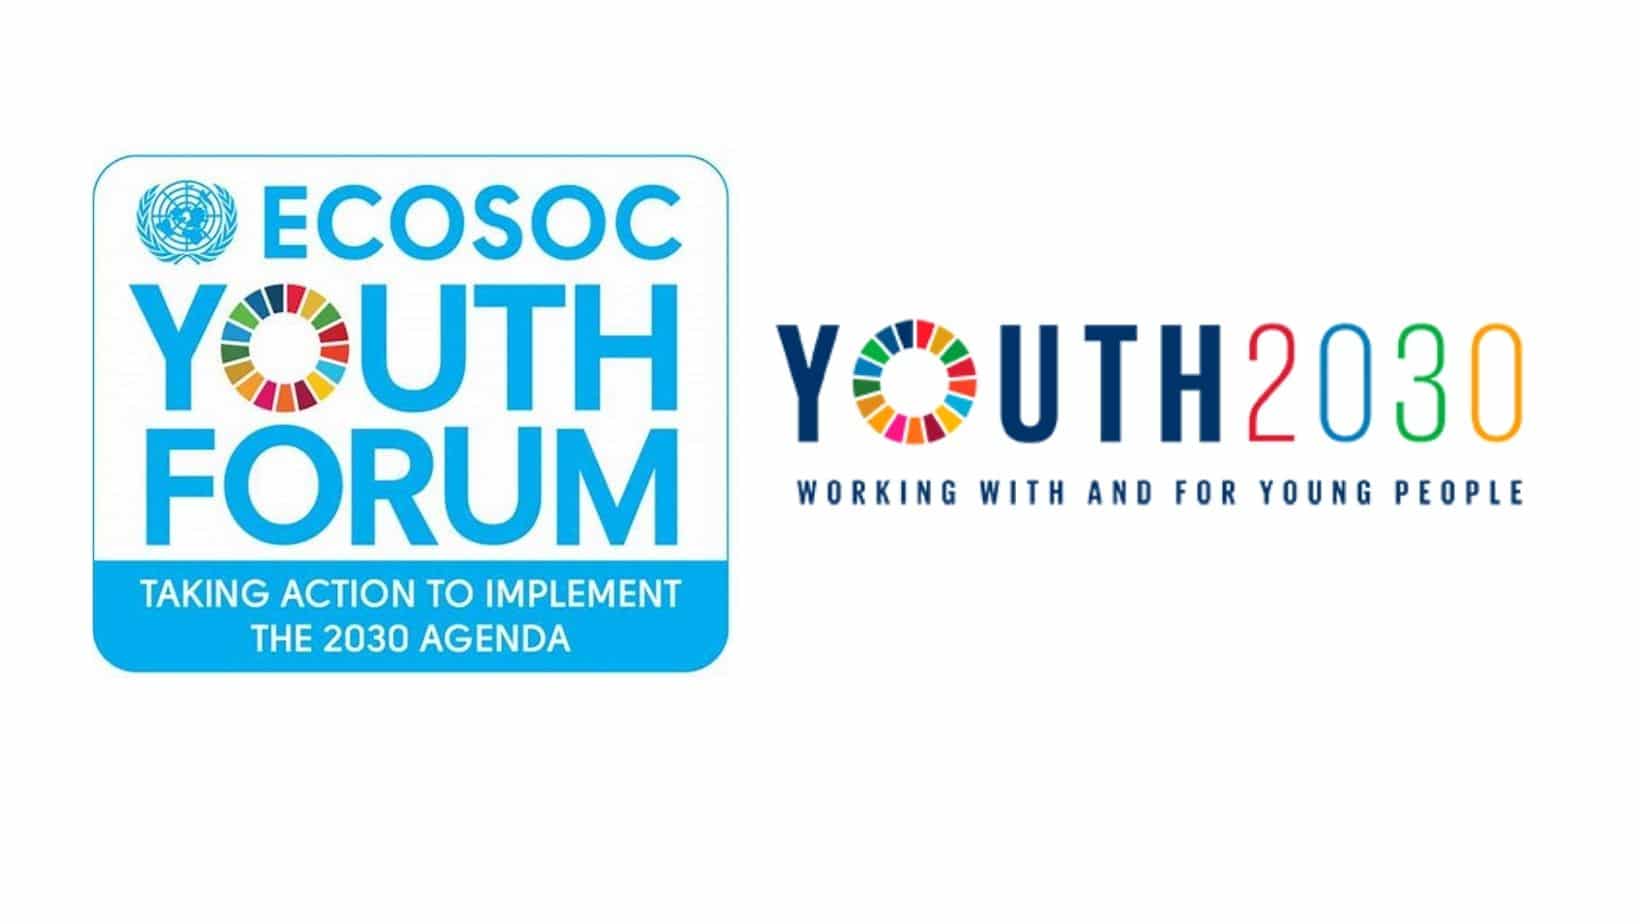 ECOSOC YOUTH FORUM 2022 (THE UNITED NATIONS ECONOMIC AND SOCIAL COUNCIL